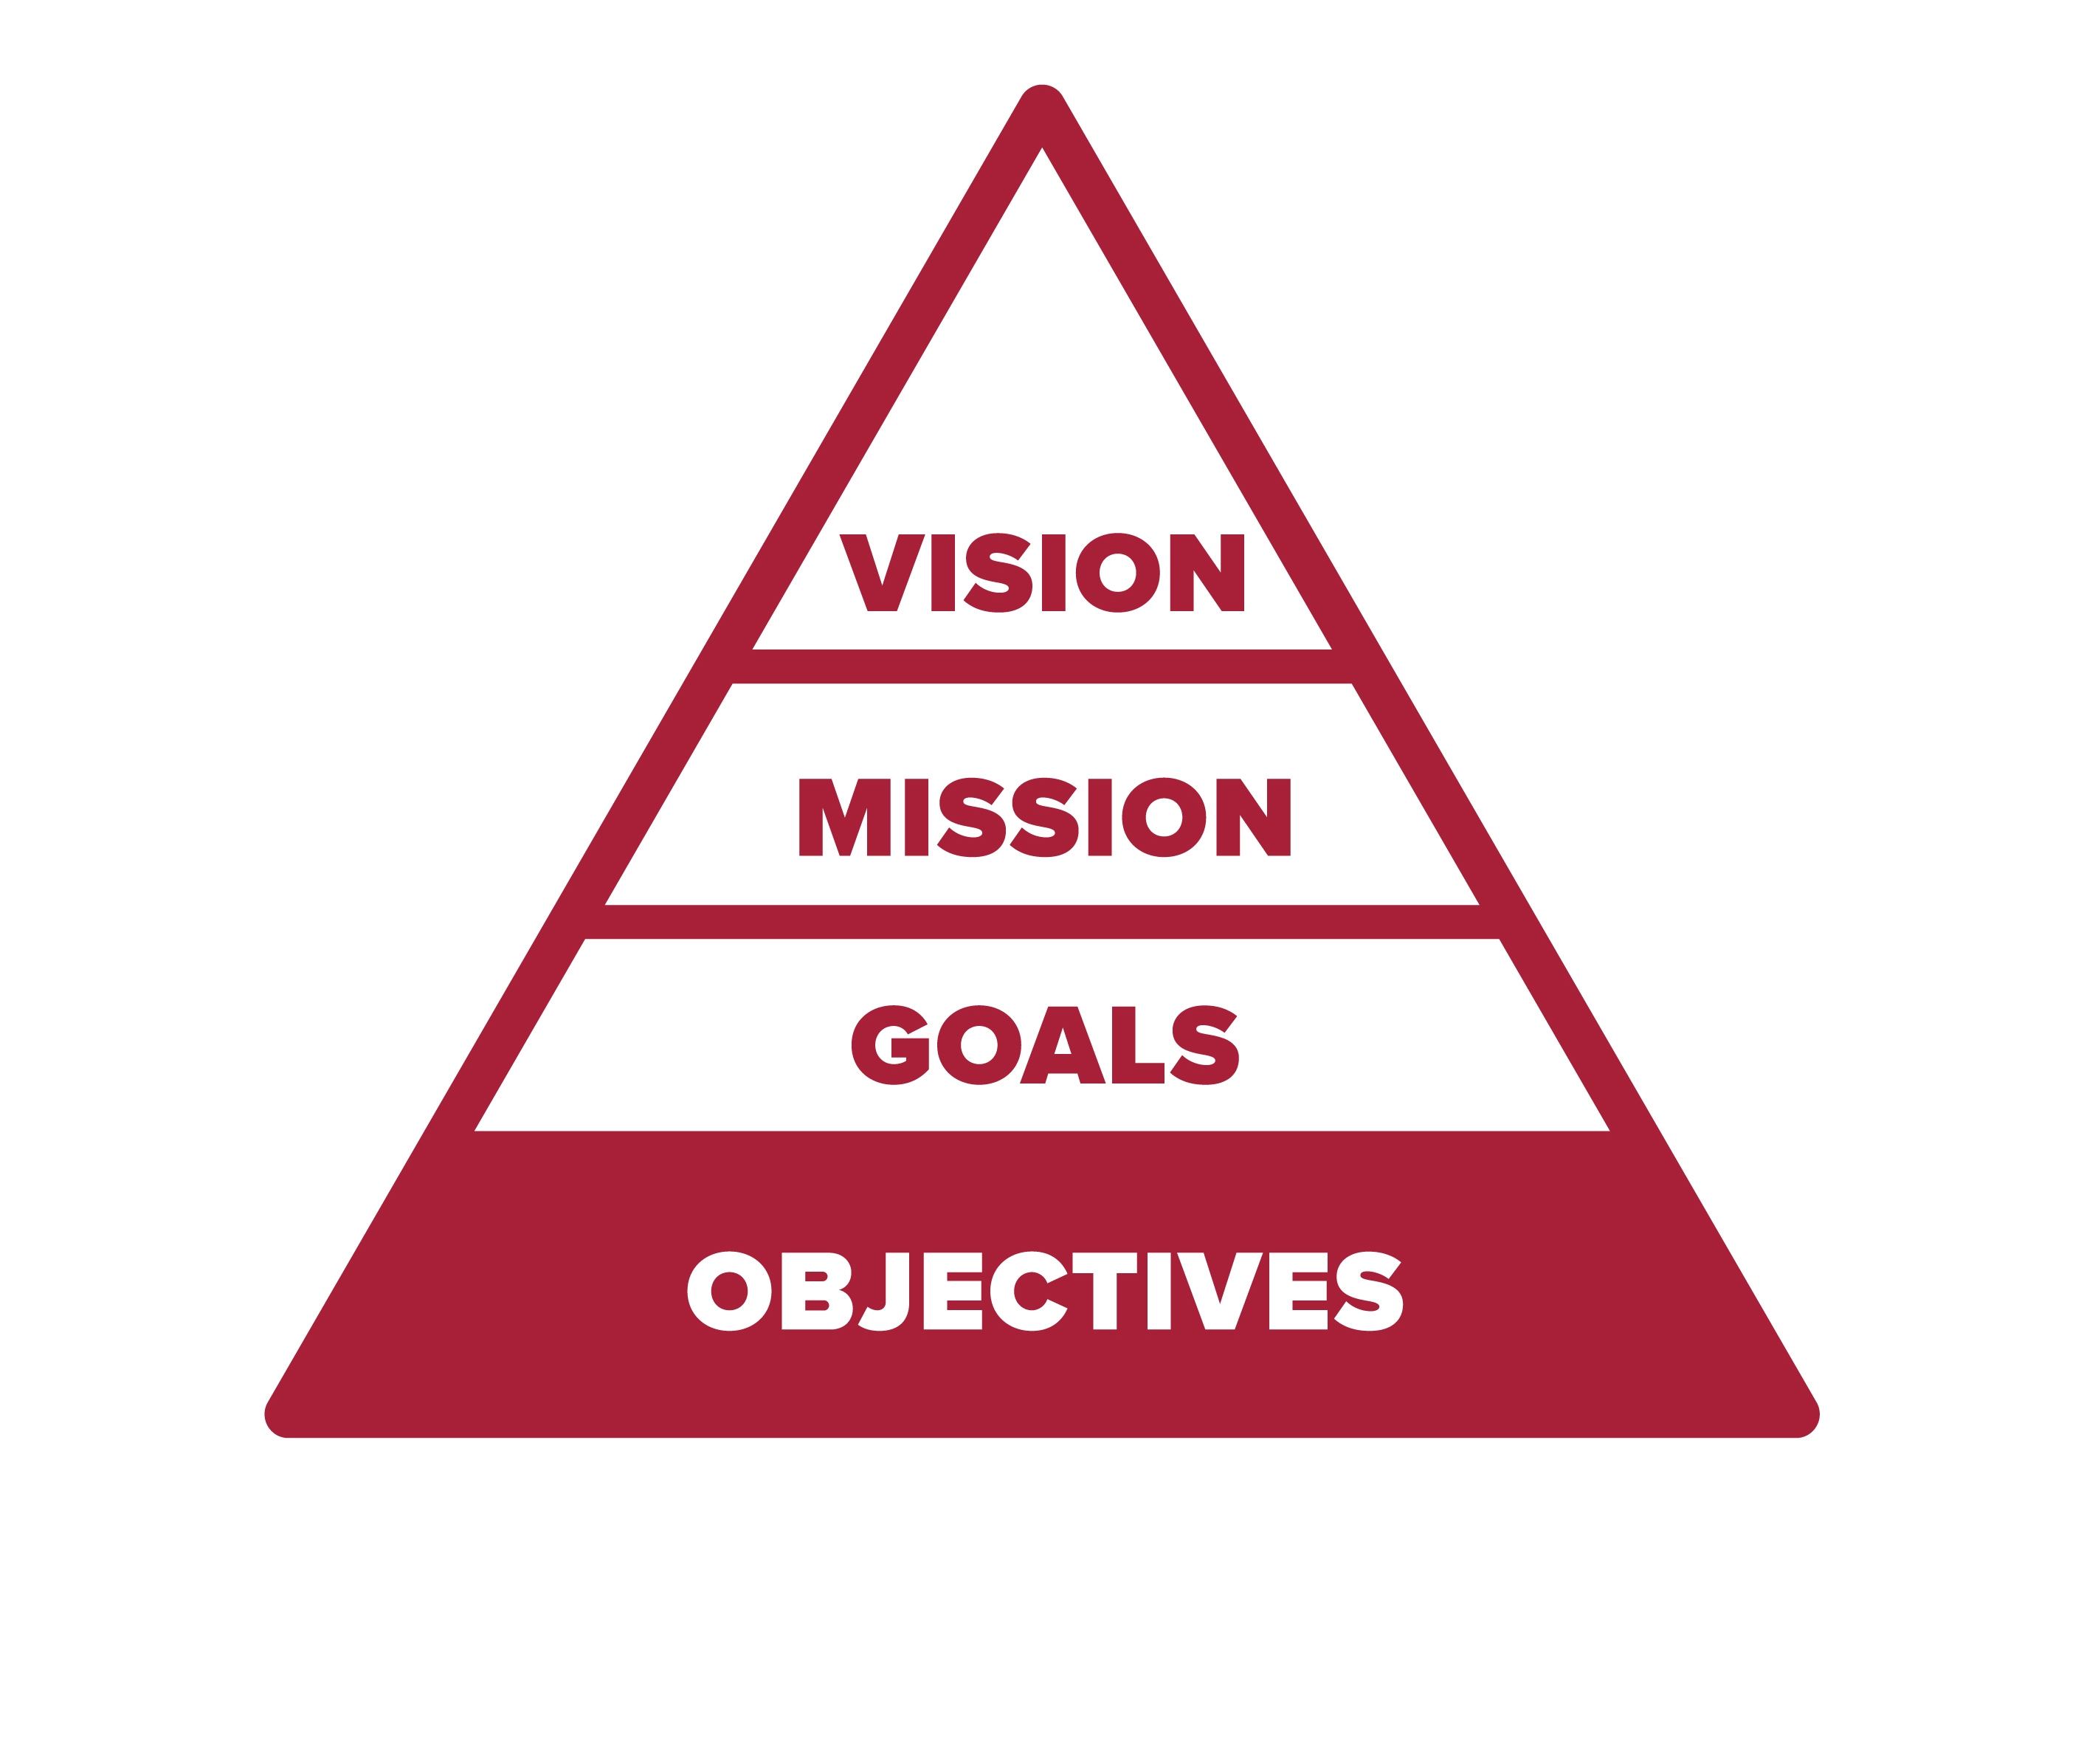 Image of objectives icon